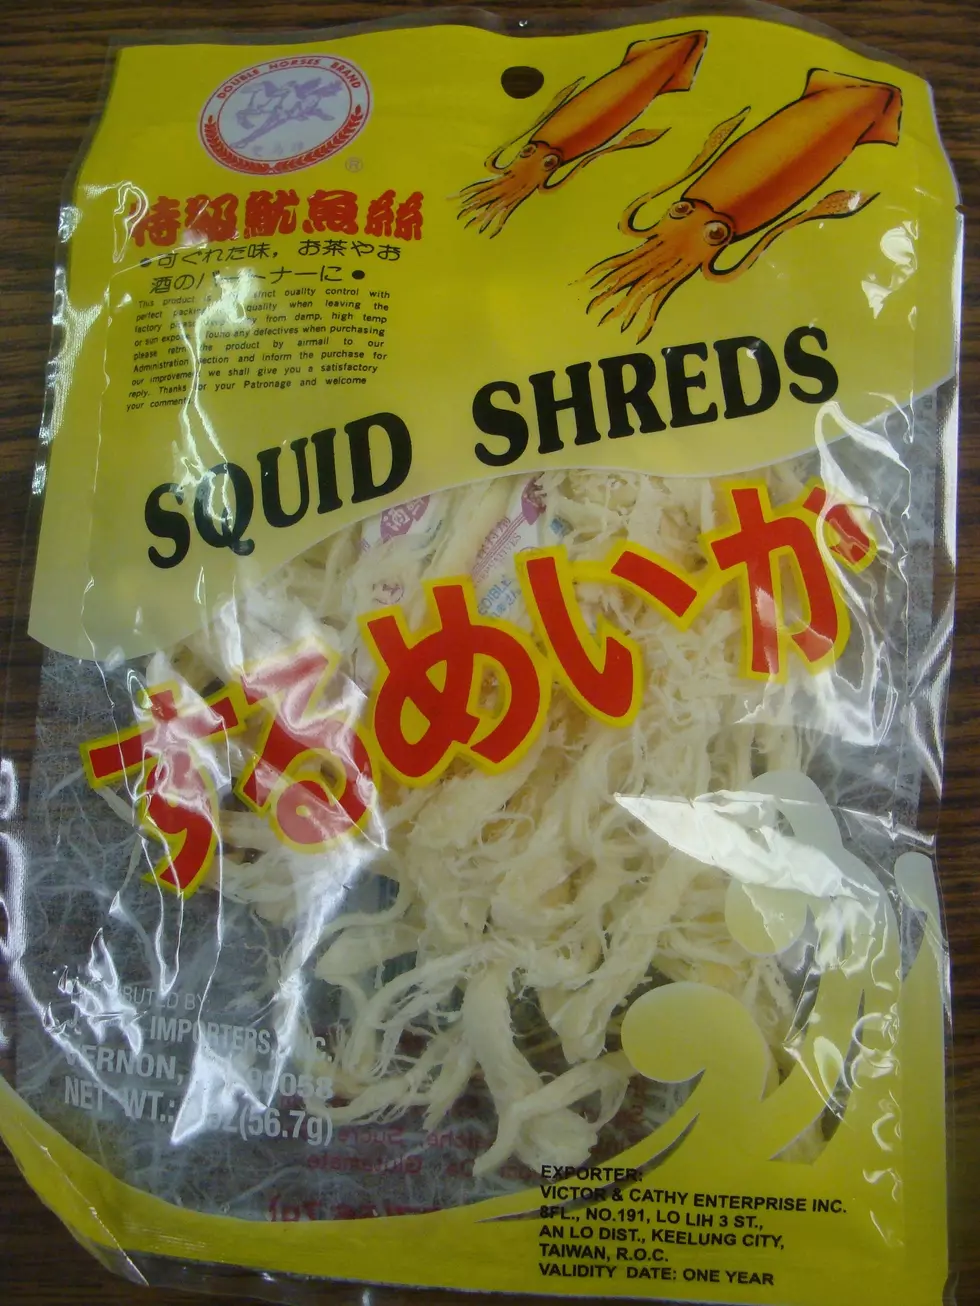 Will Jerry Eat It? Squid Shreds